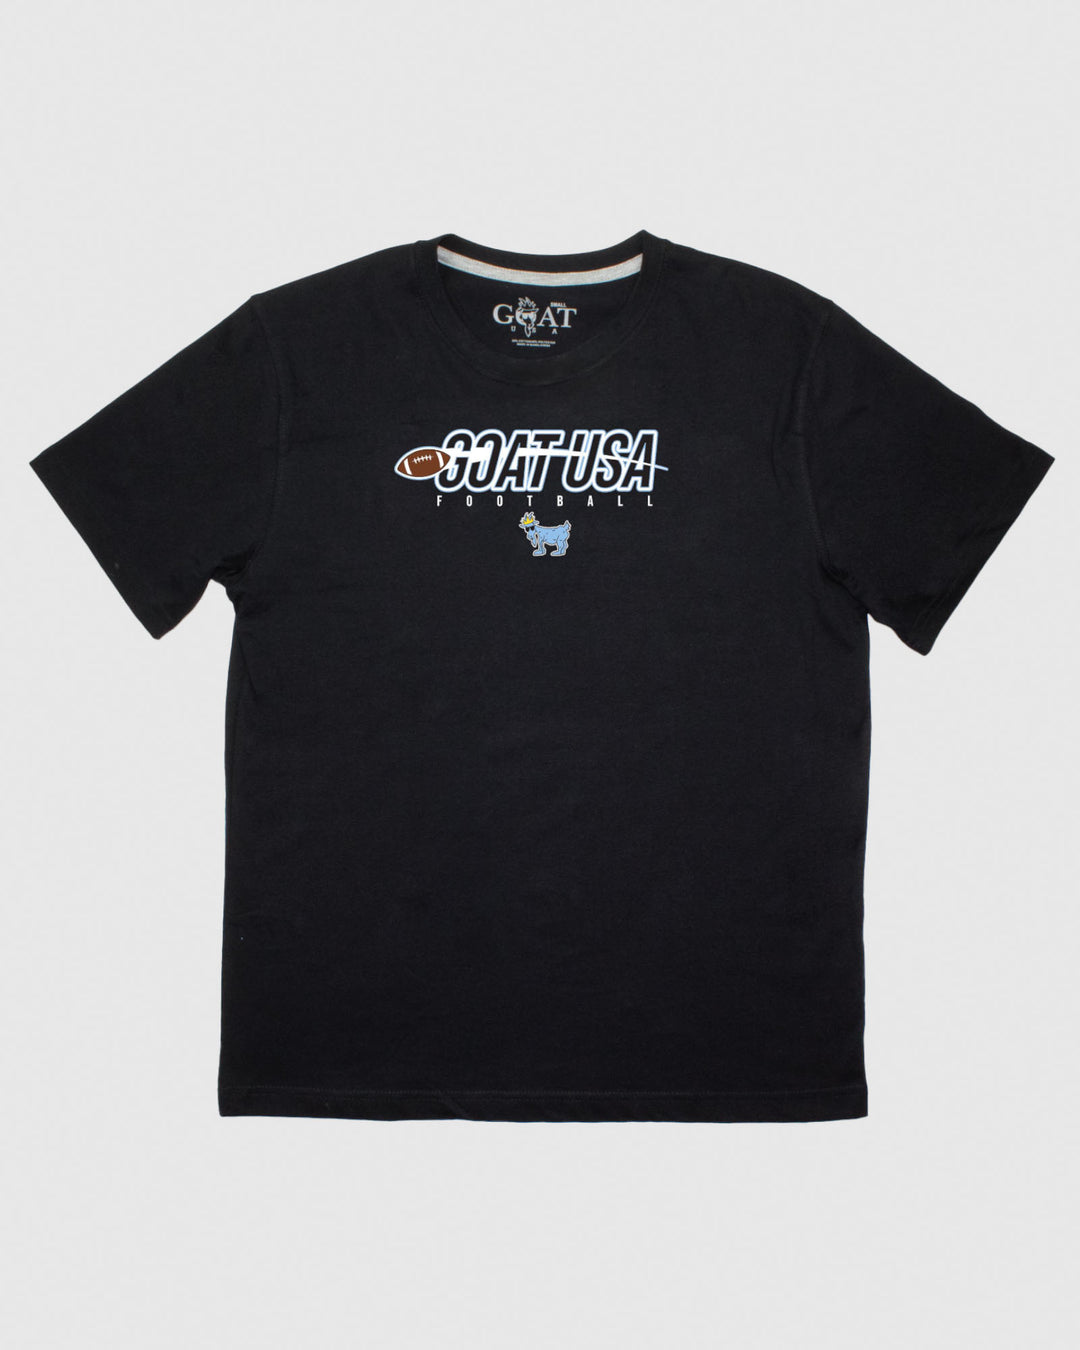 Black shirt with football that goes through the wording "GOAT USA"